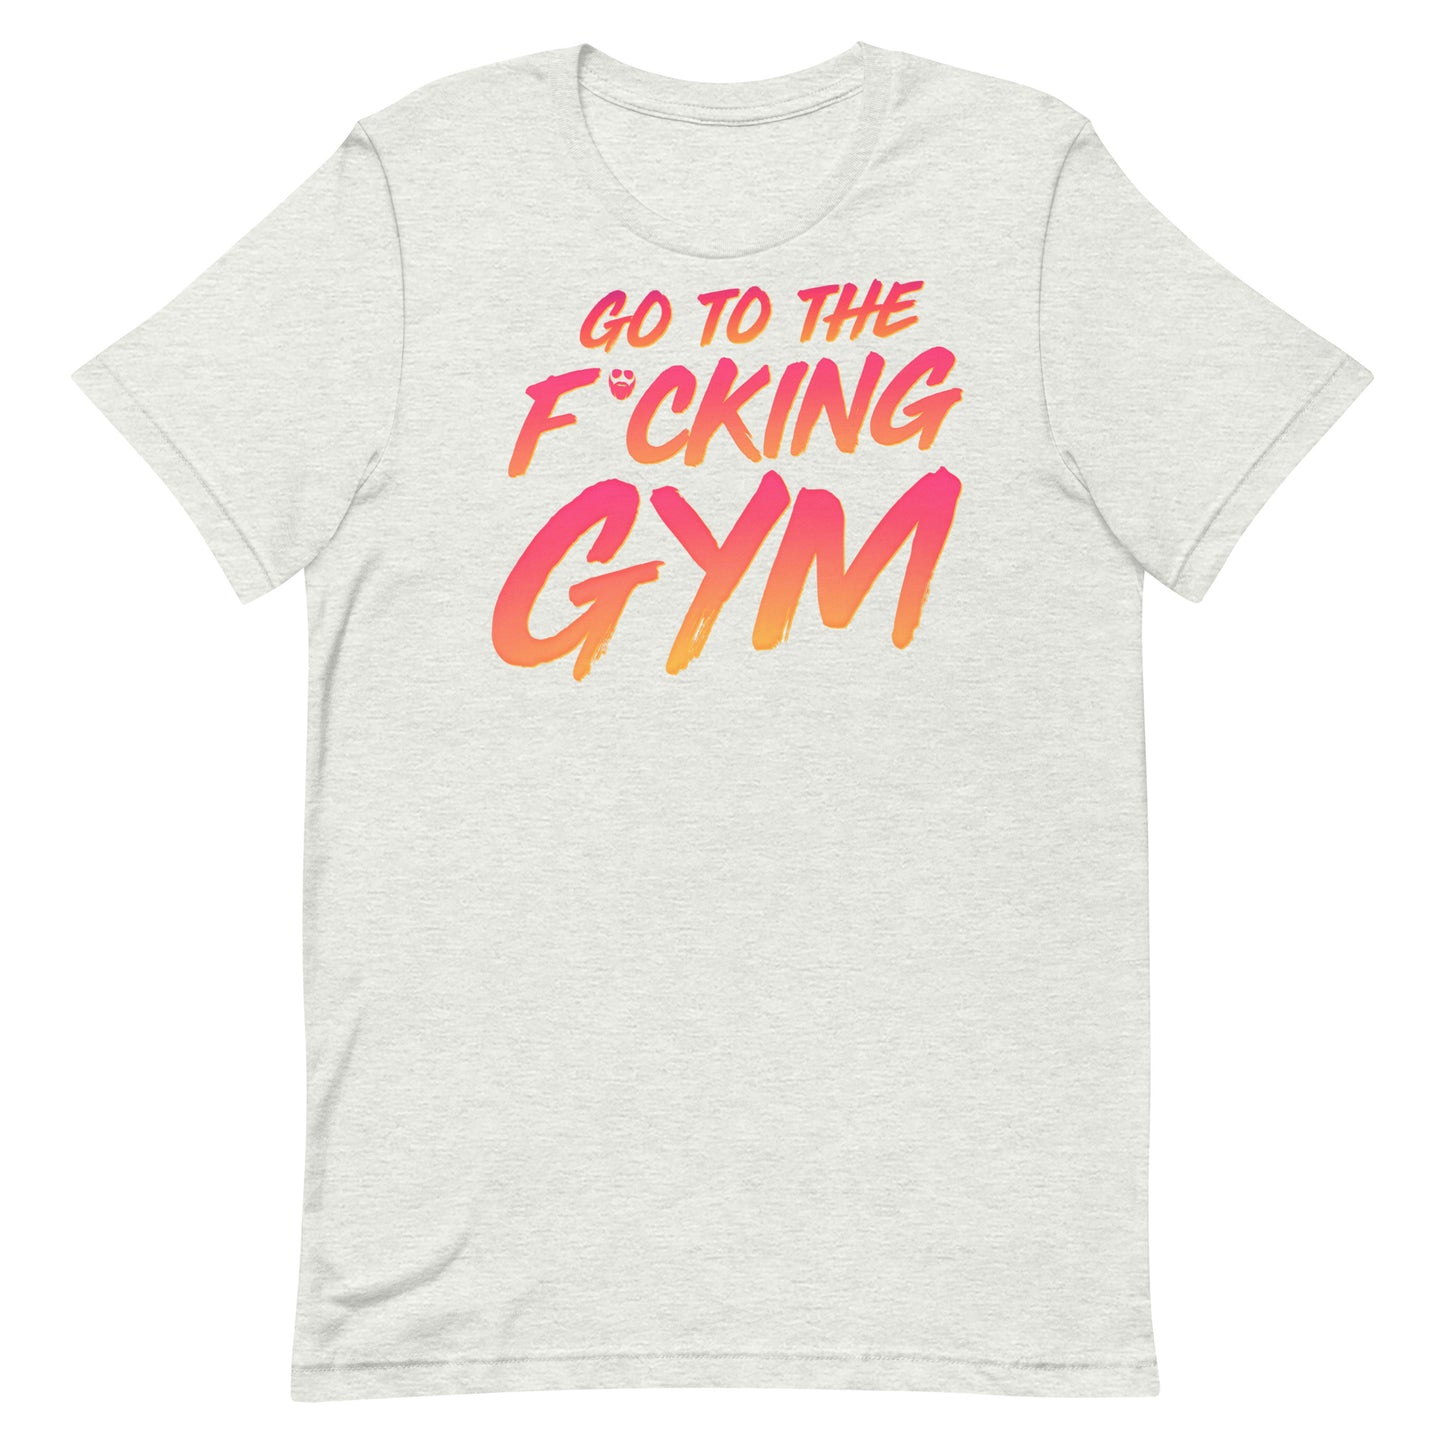 Go To The F*cking Gym Sunset T-Shirt